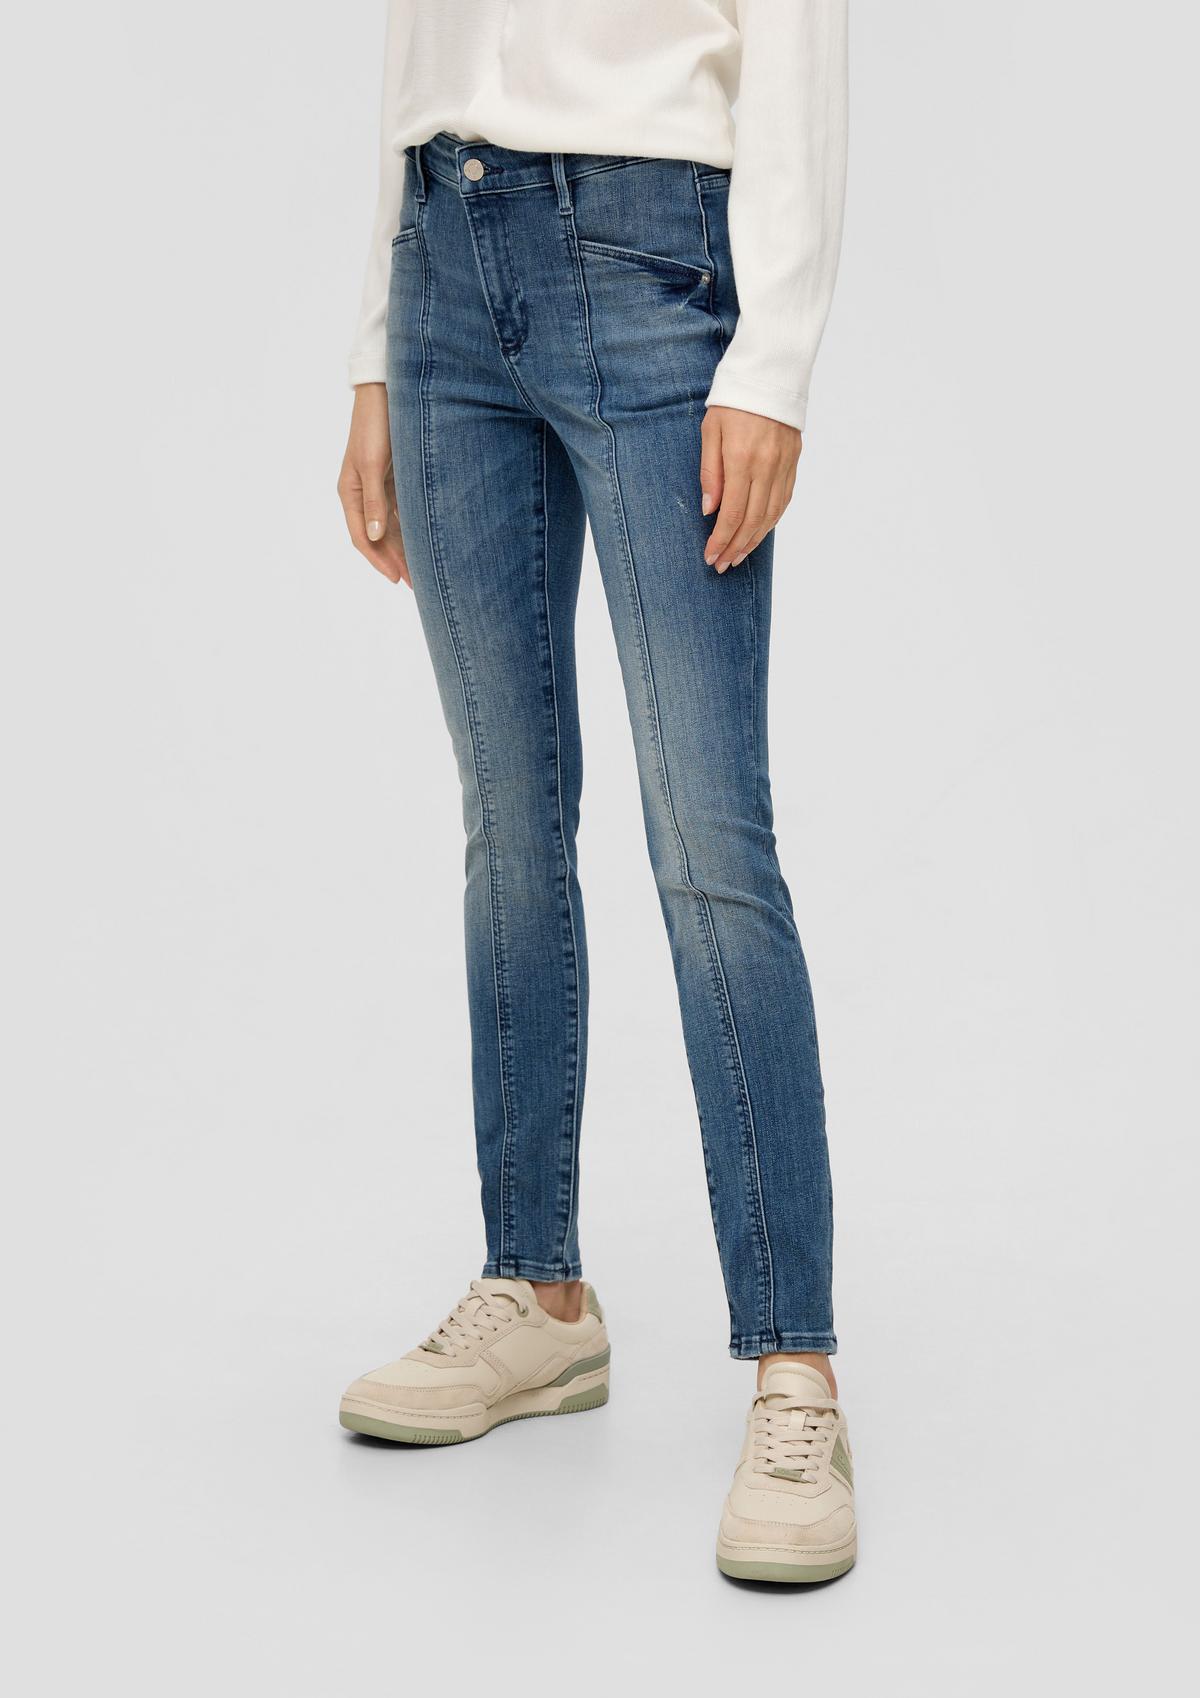 Jean / coupe Skinny Fit / taille haute / Skinny Leg